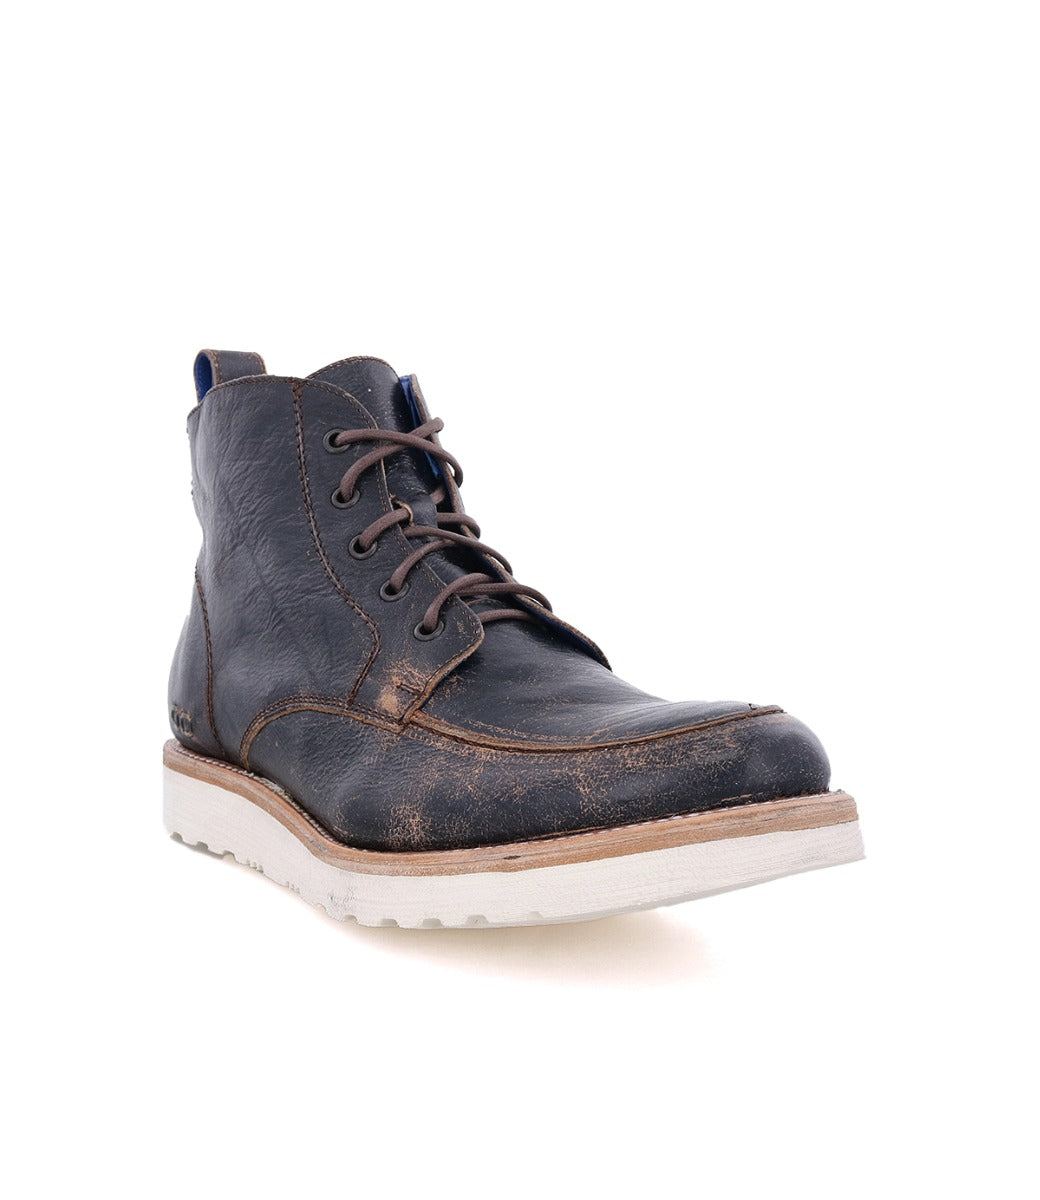 A single Lincoln men's leather boot with laces, set against a white background. (Brand: Bed Stu)